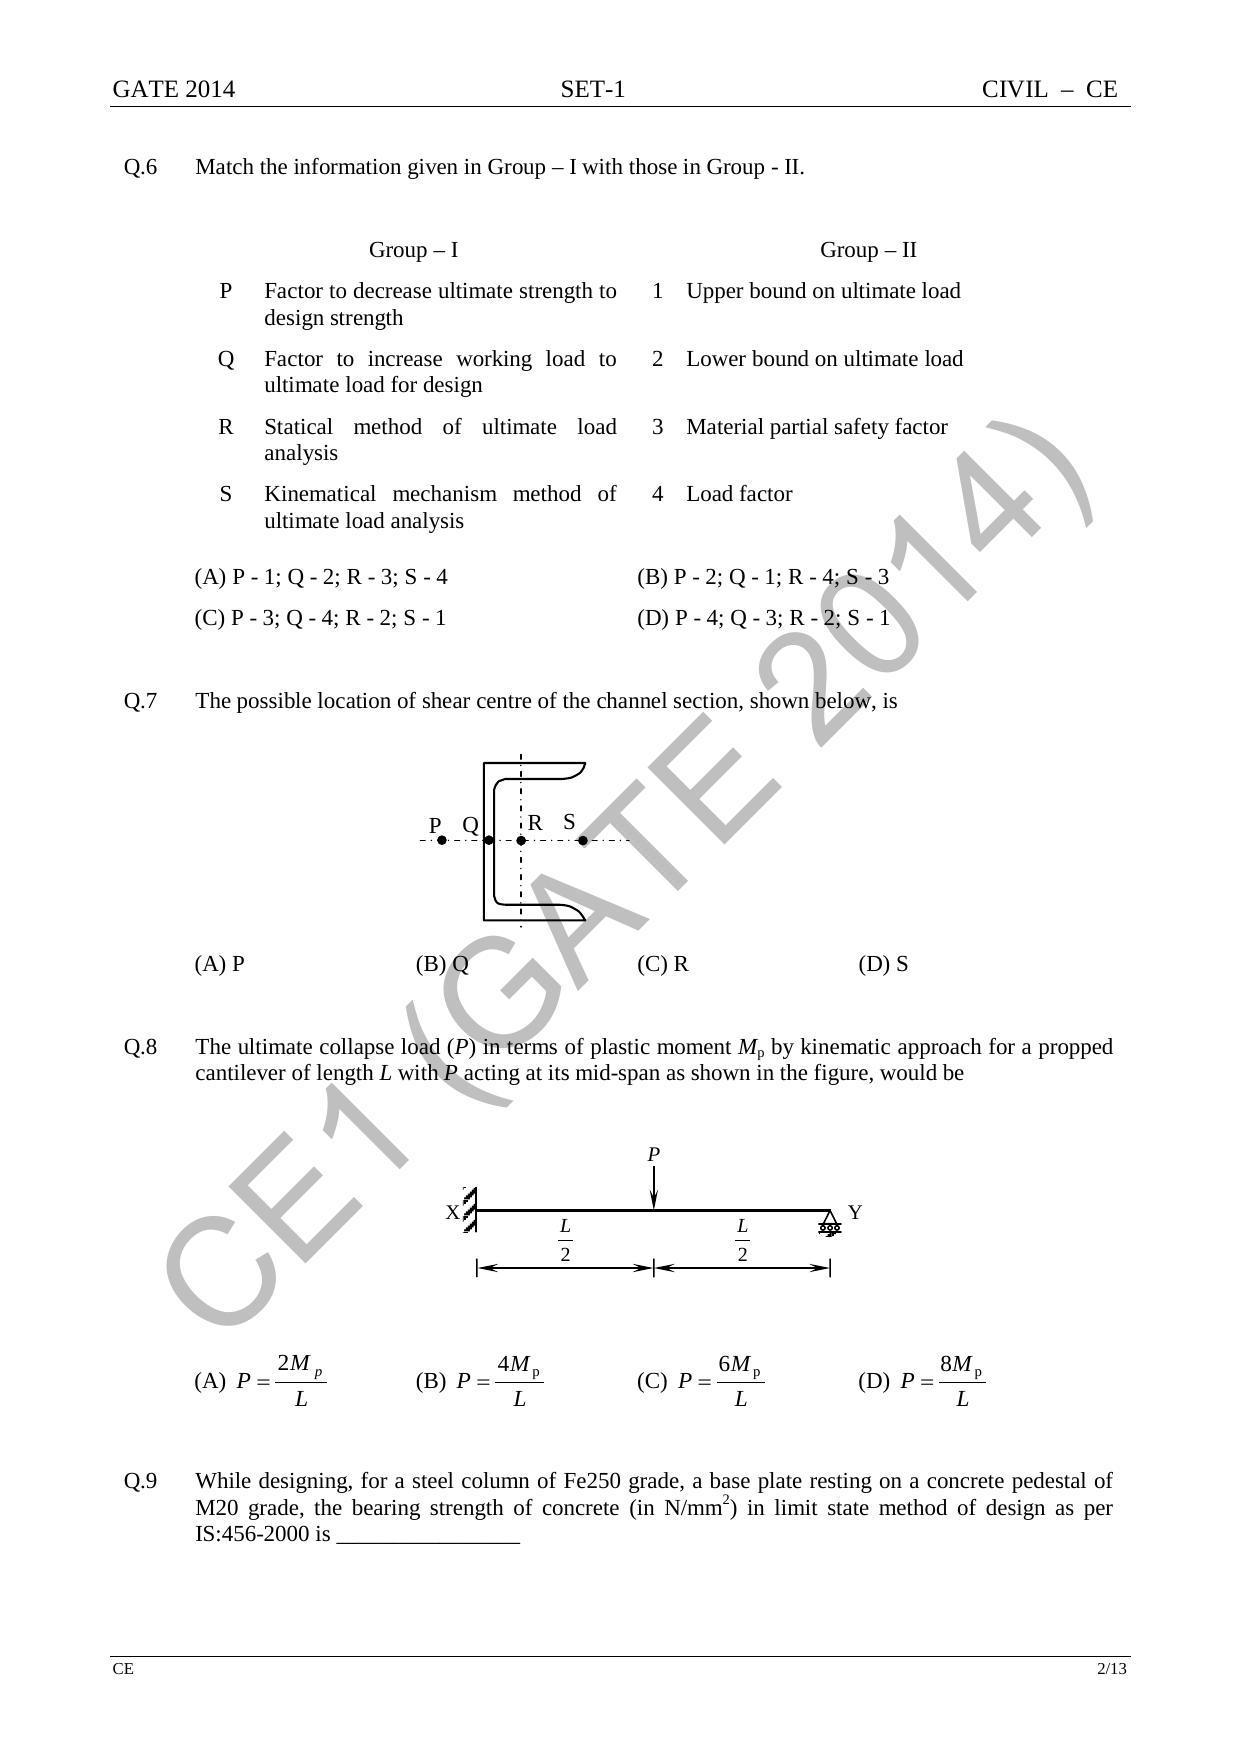 GATE 2014 Civil Engineering (CE) Question Paper with Answer Key - Page 9